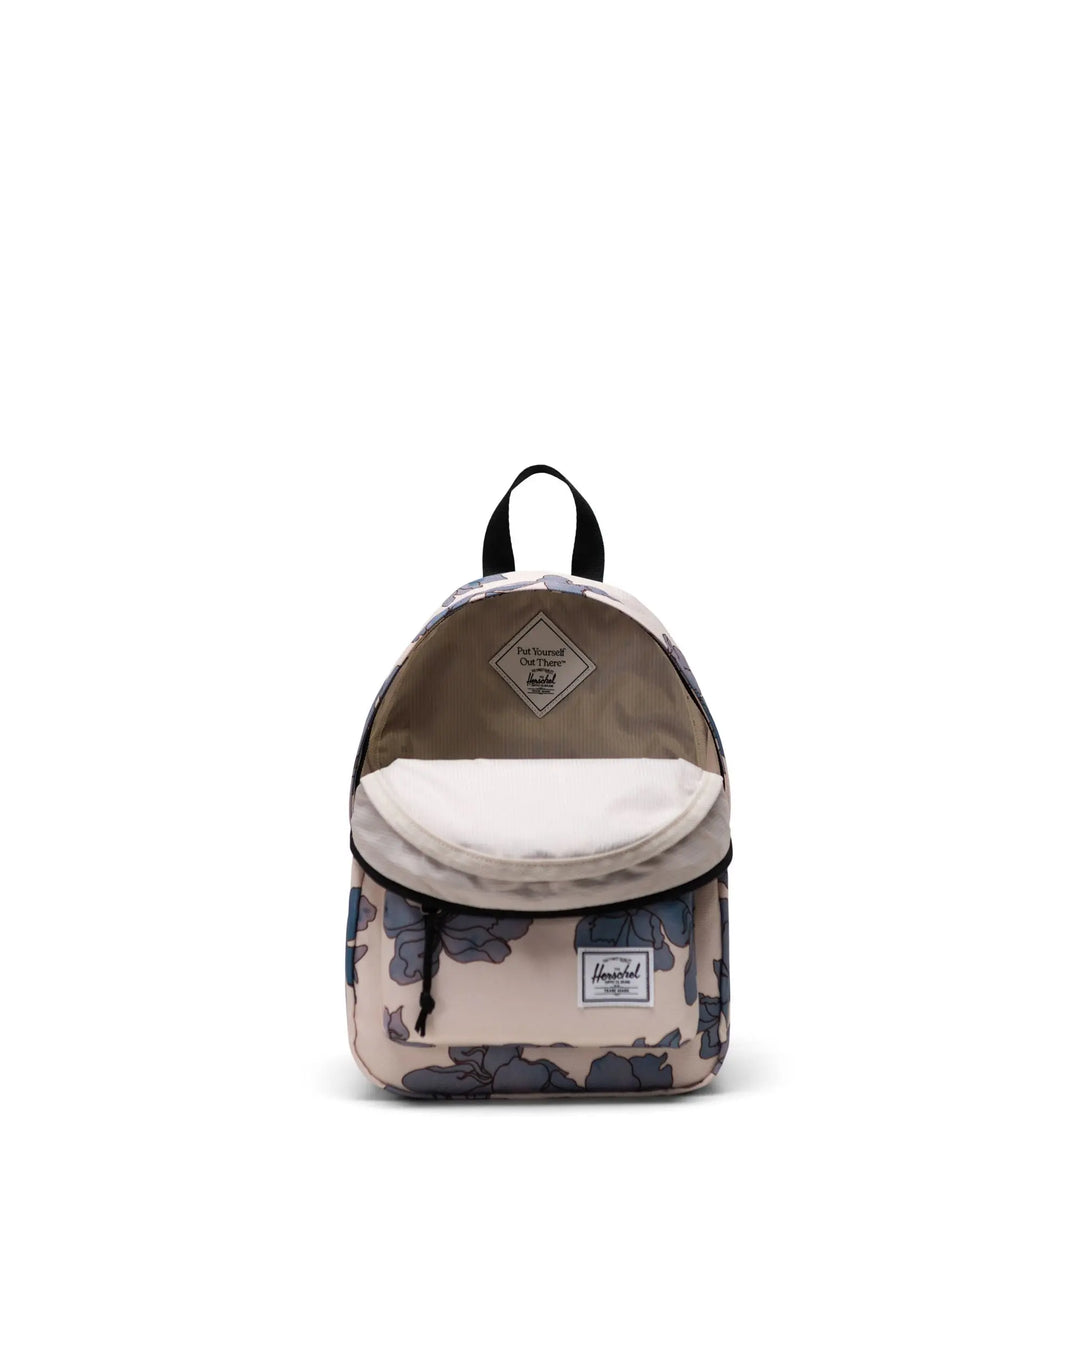 Herschel Supply Co. Classic Backpack Mini - 6.5L - Moonbeam Floral Waves - Sun Diego Boardshop